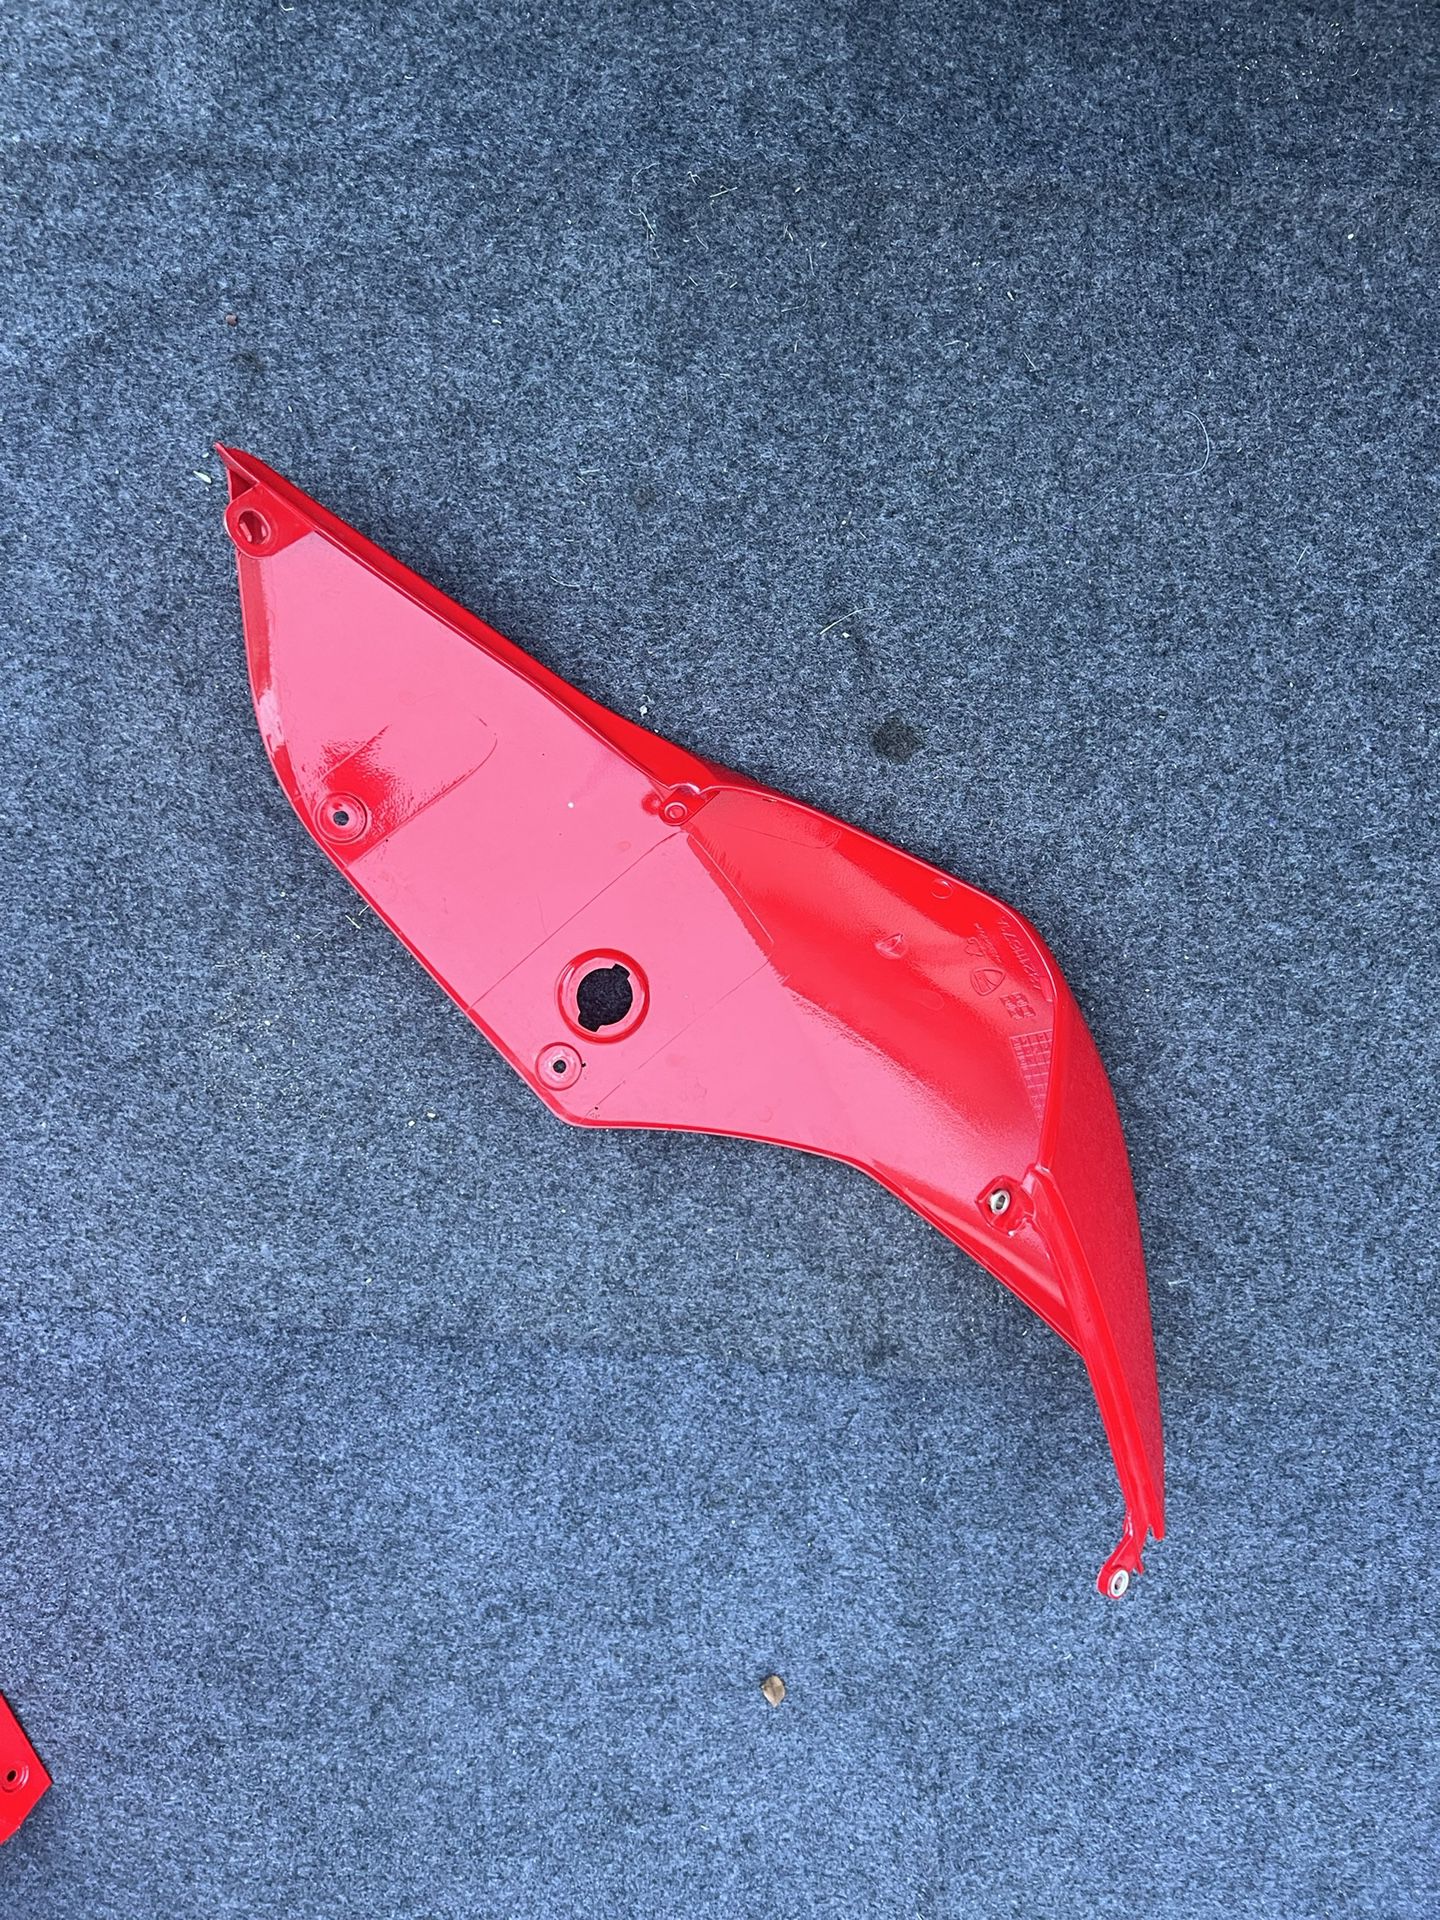 Ducati Panigale 1199 899 Right Rear Tail Body Fairing Panel (contact info removed)71A 482.111.671.A